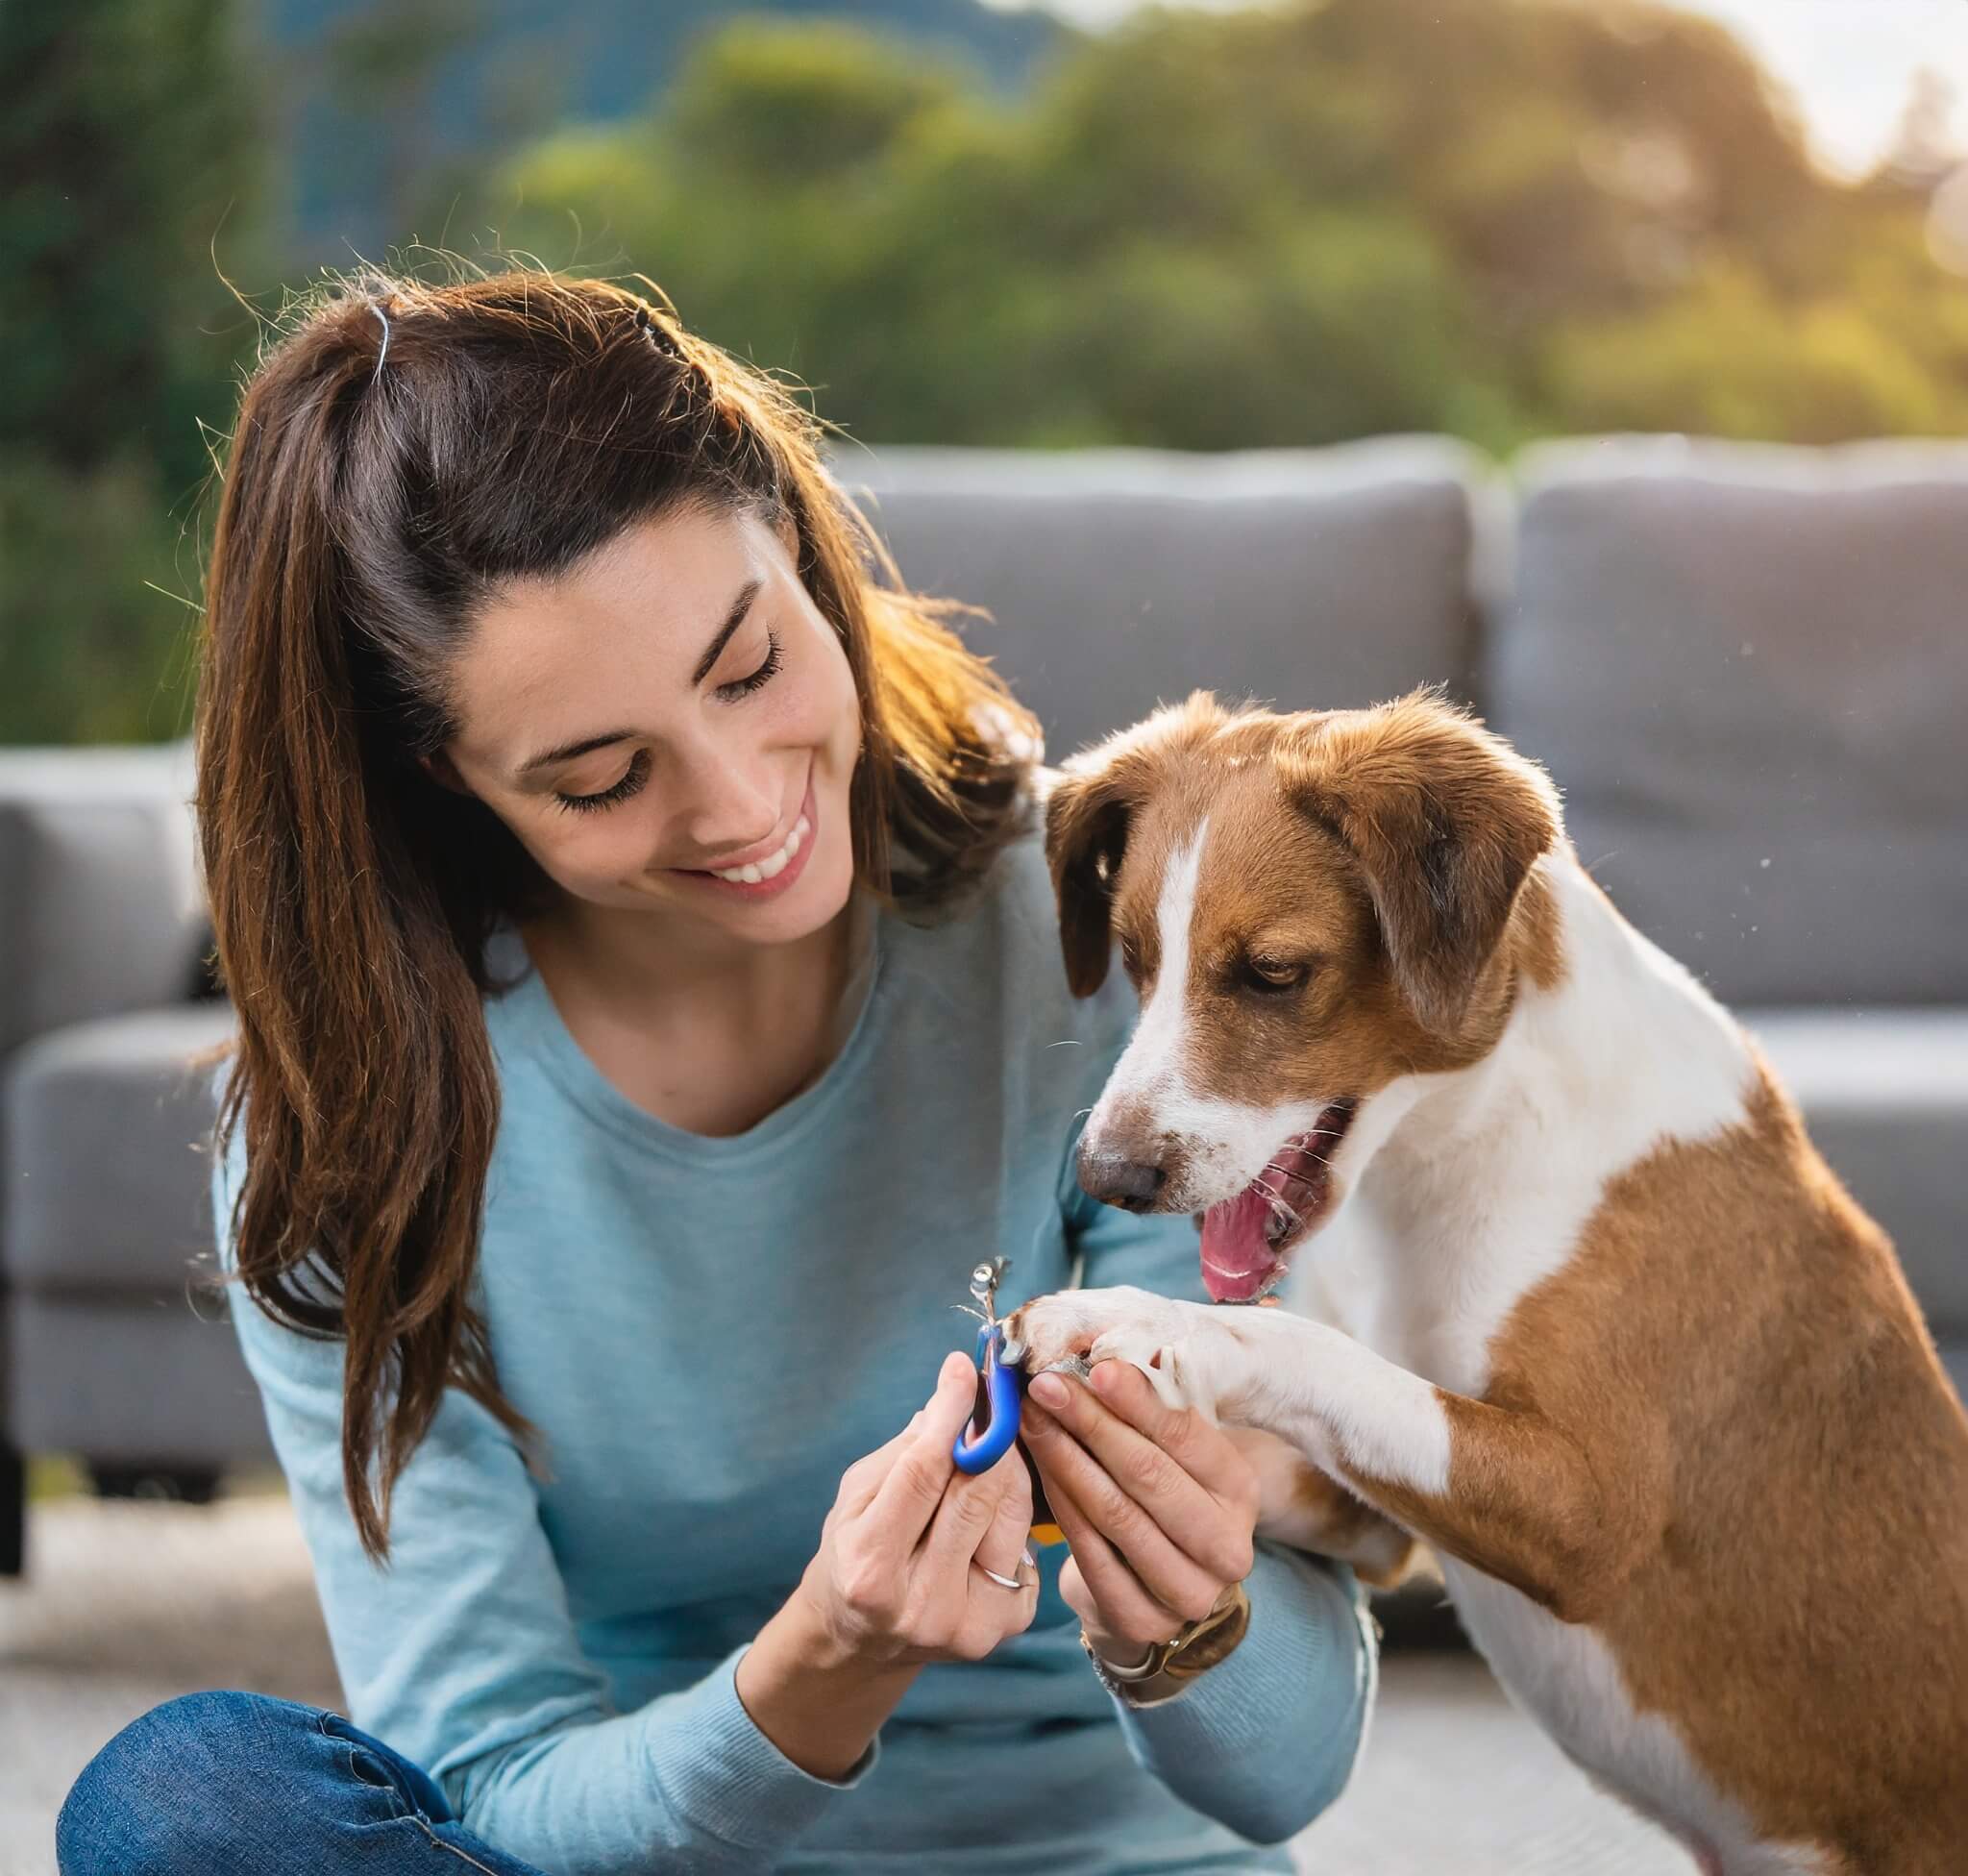 How to Trim Your Dog’s Nails Safely at Home